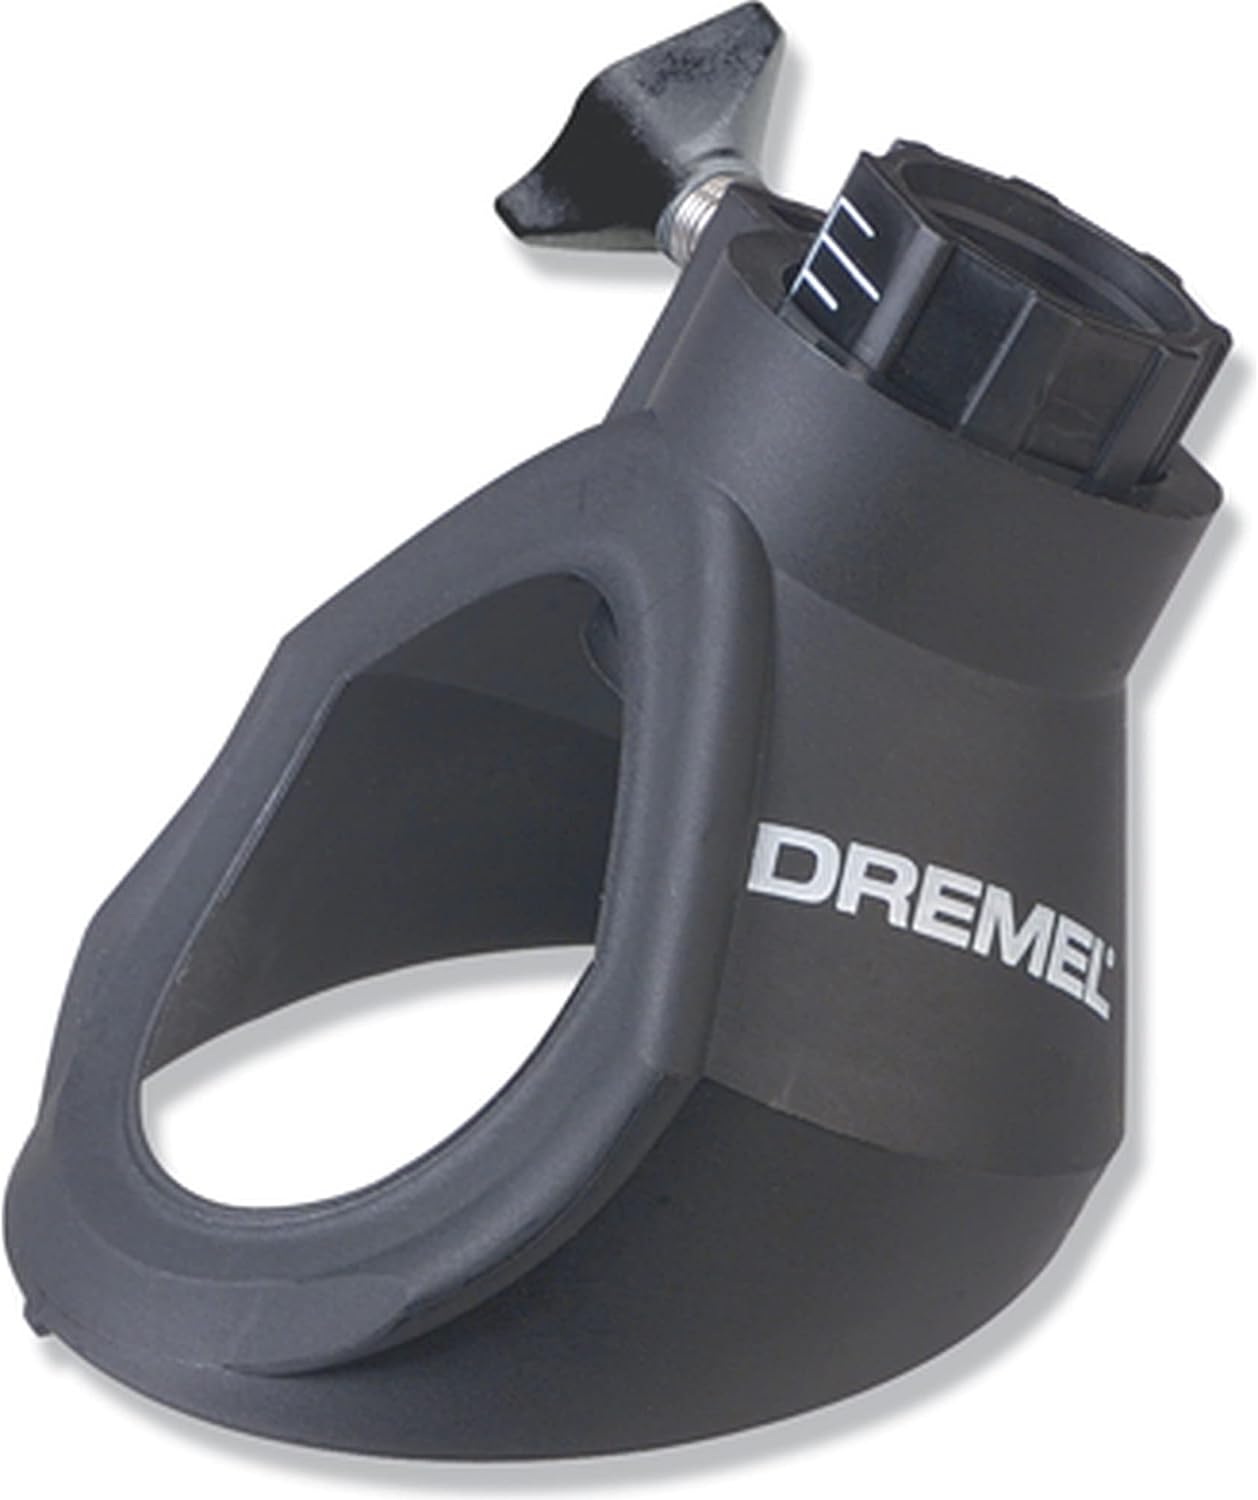 Dremel Grout Removal Rotary Tool Attachment, 568-01